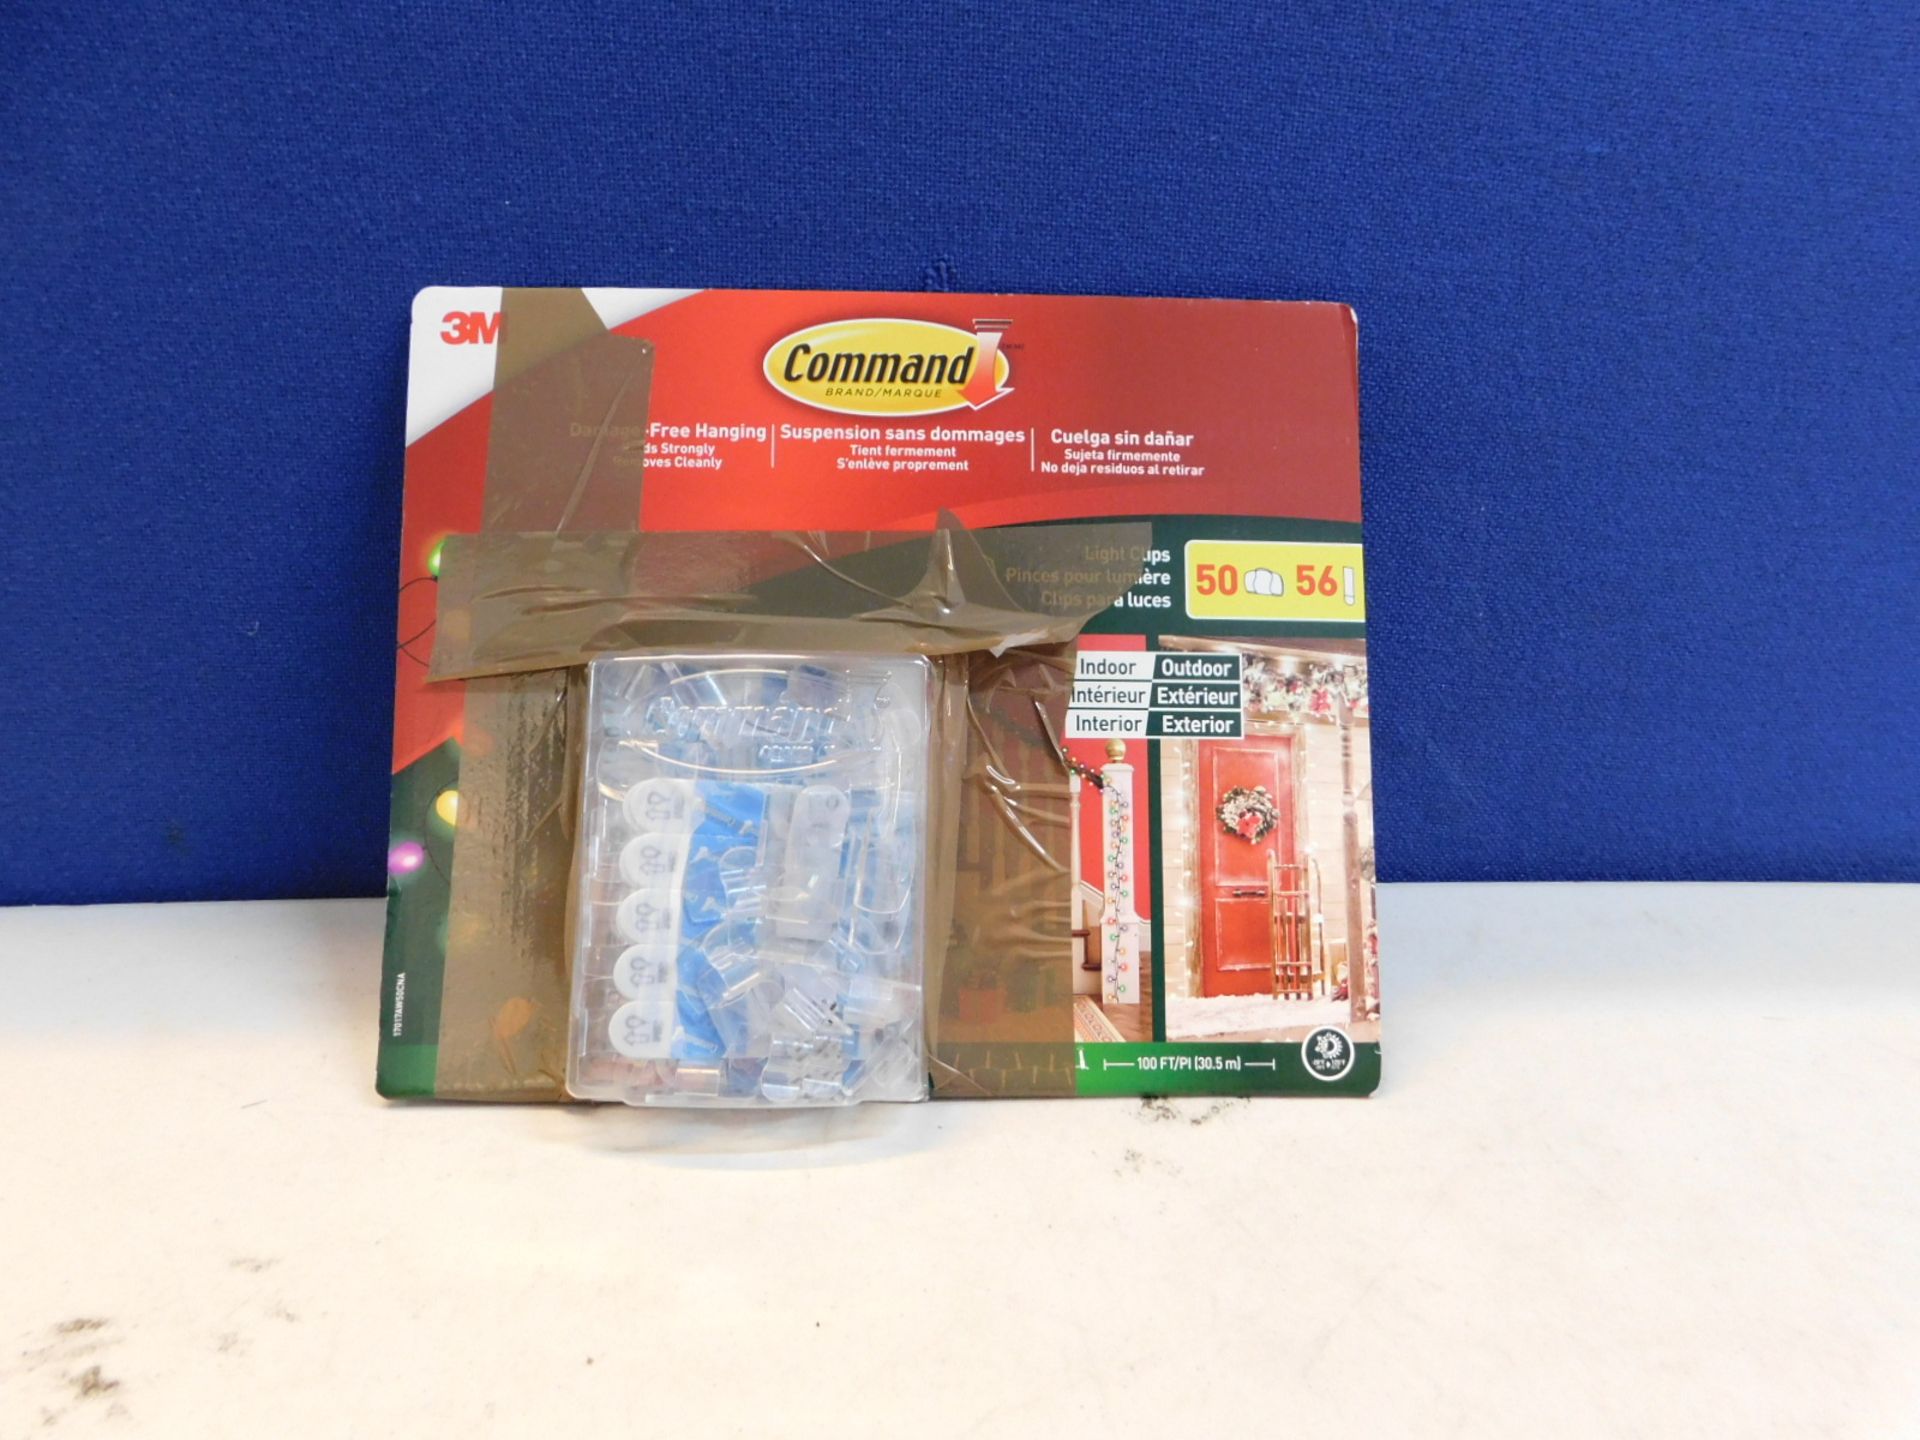 1 PACK OF COMMAND BRAND DAMAGE-FREE HANGING HOOKS RRP Â£24.99